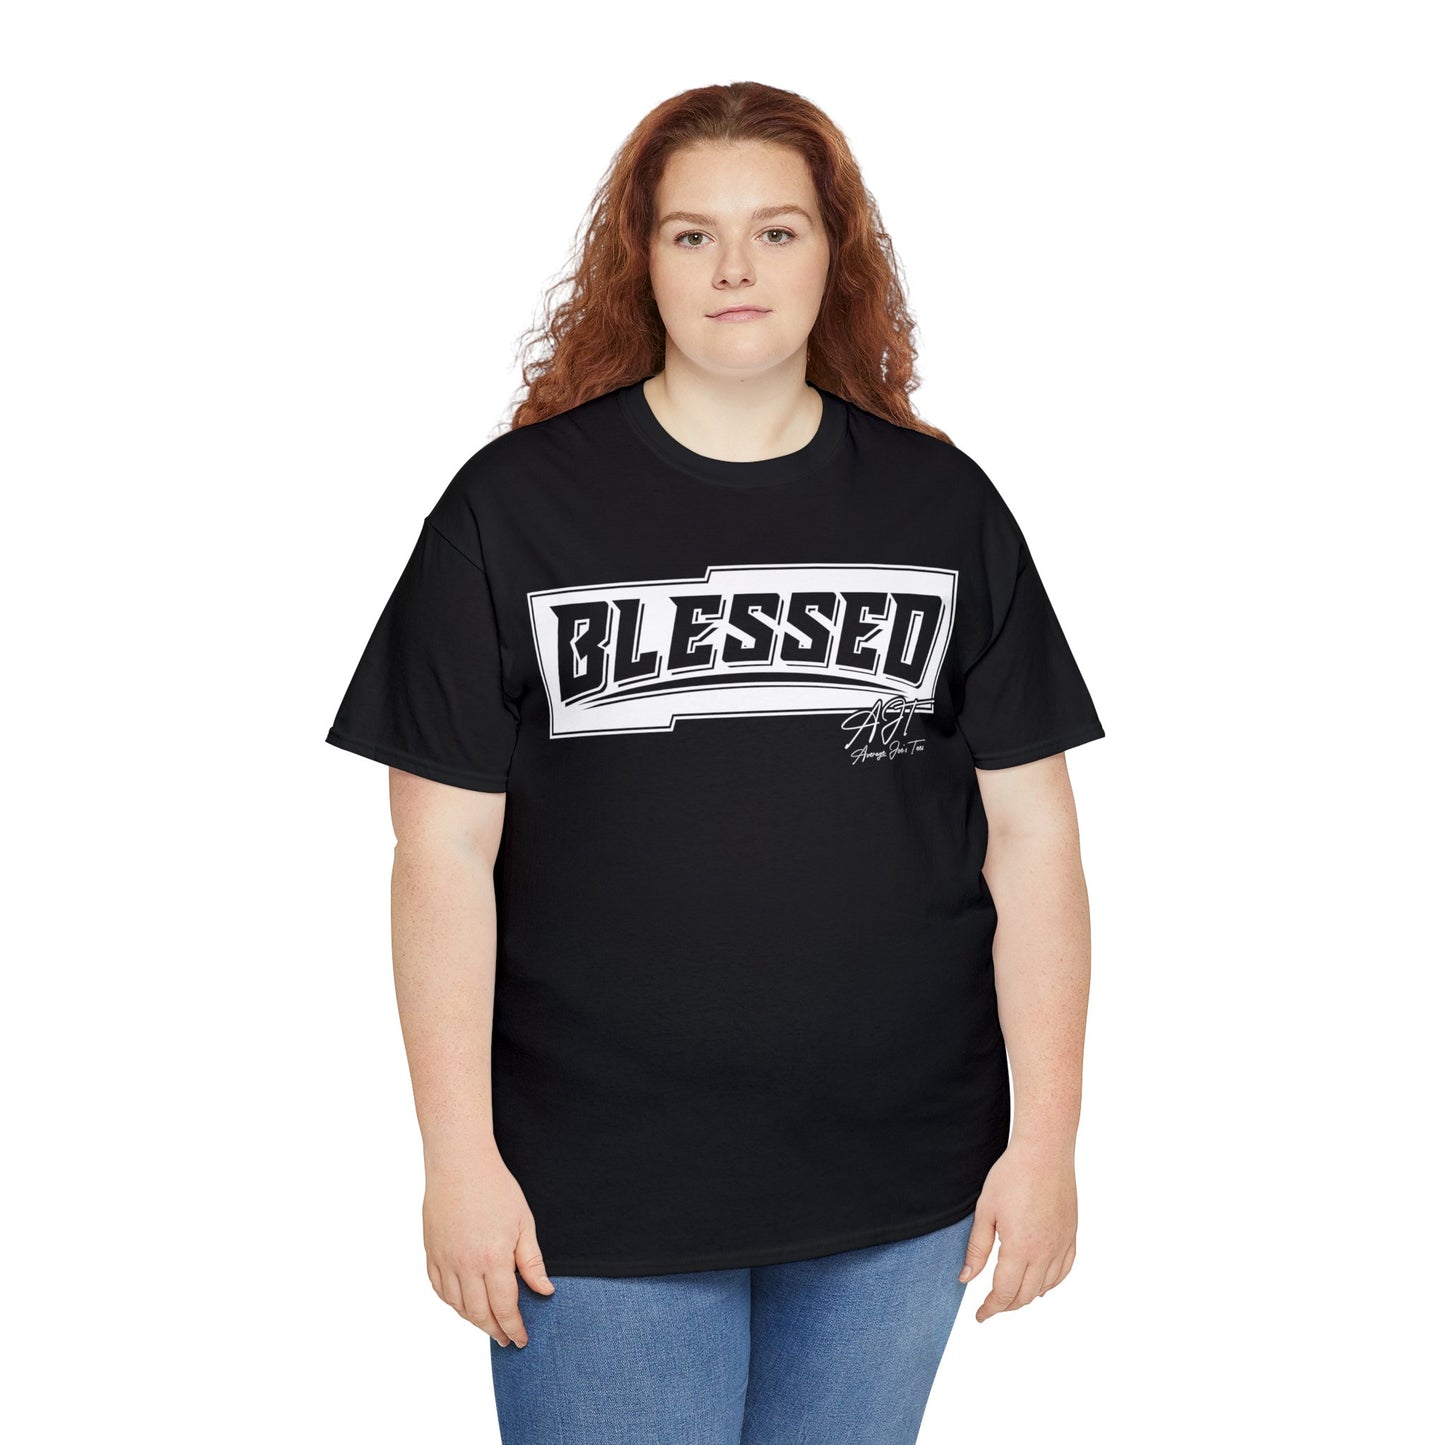 "Blessed" Heavy Cotton Tee